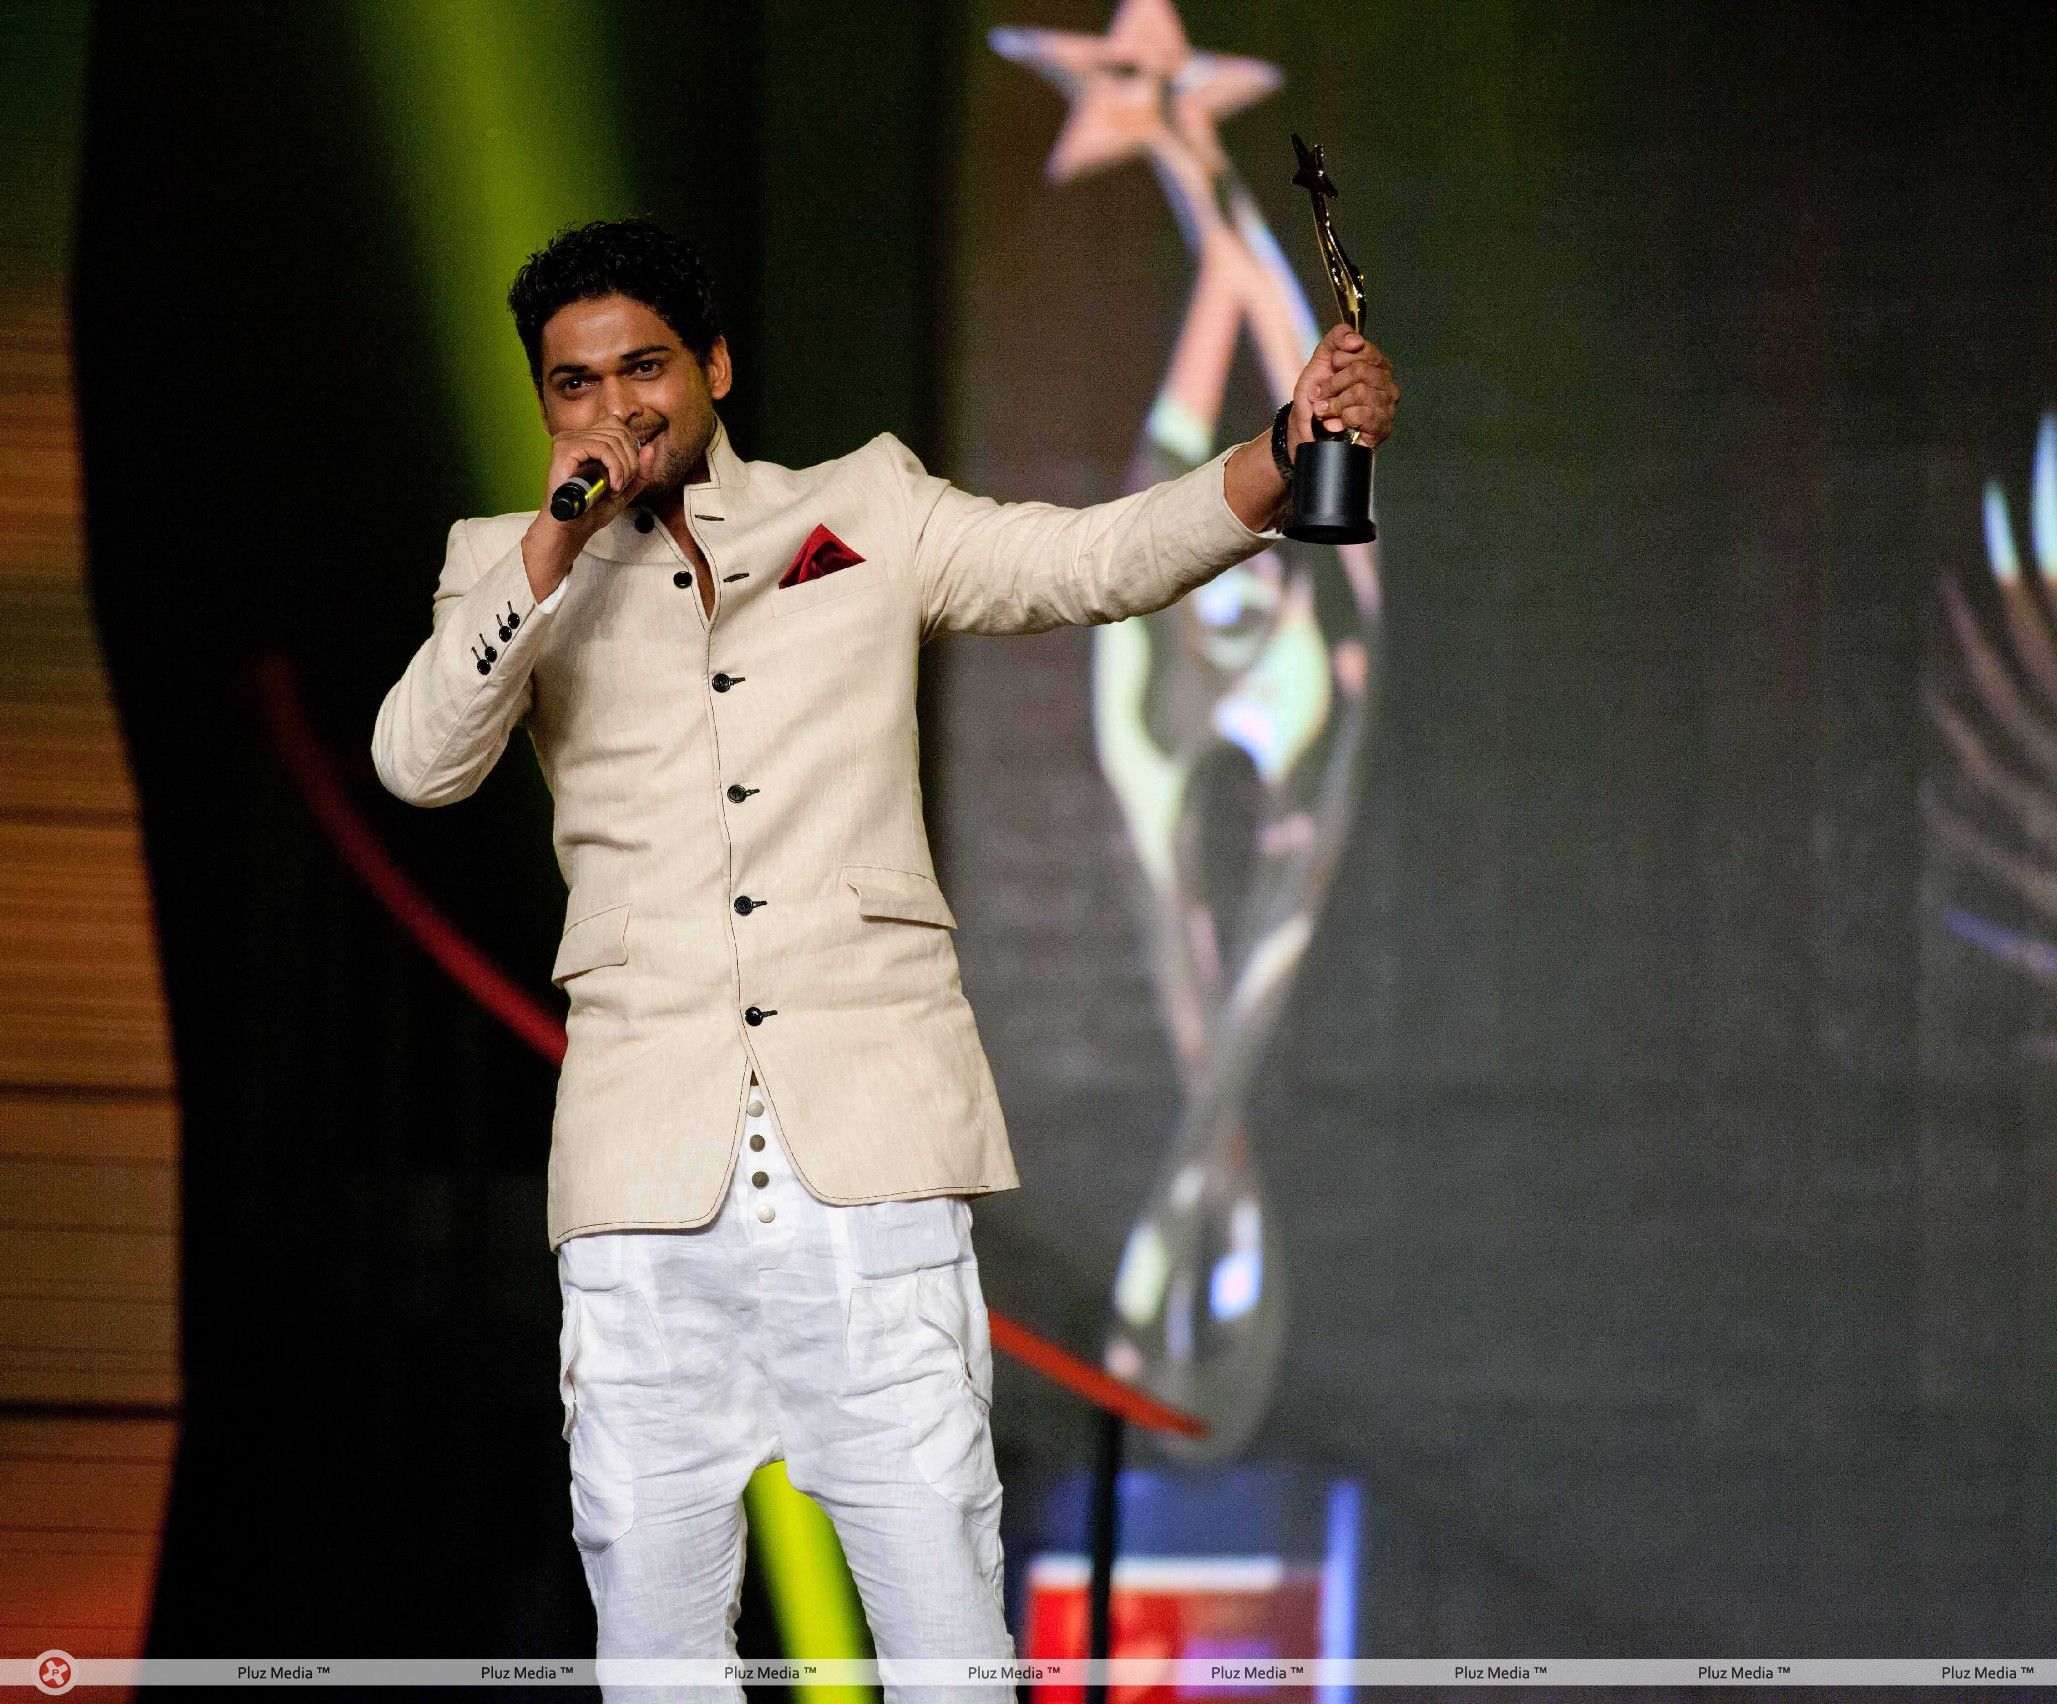 Ajmal Ameer - SIIMA Awards 2012 Day 2 in Dubai Photos | Picture 216396